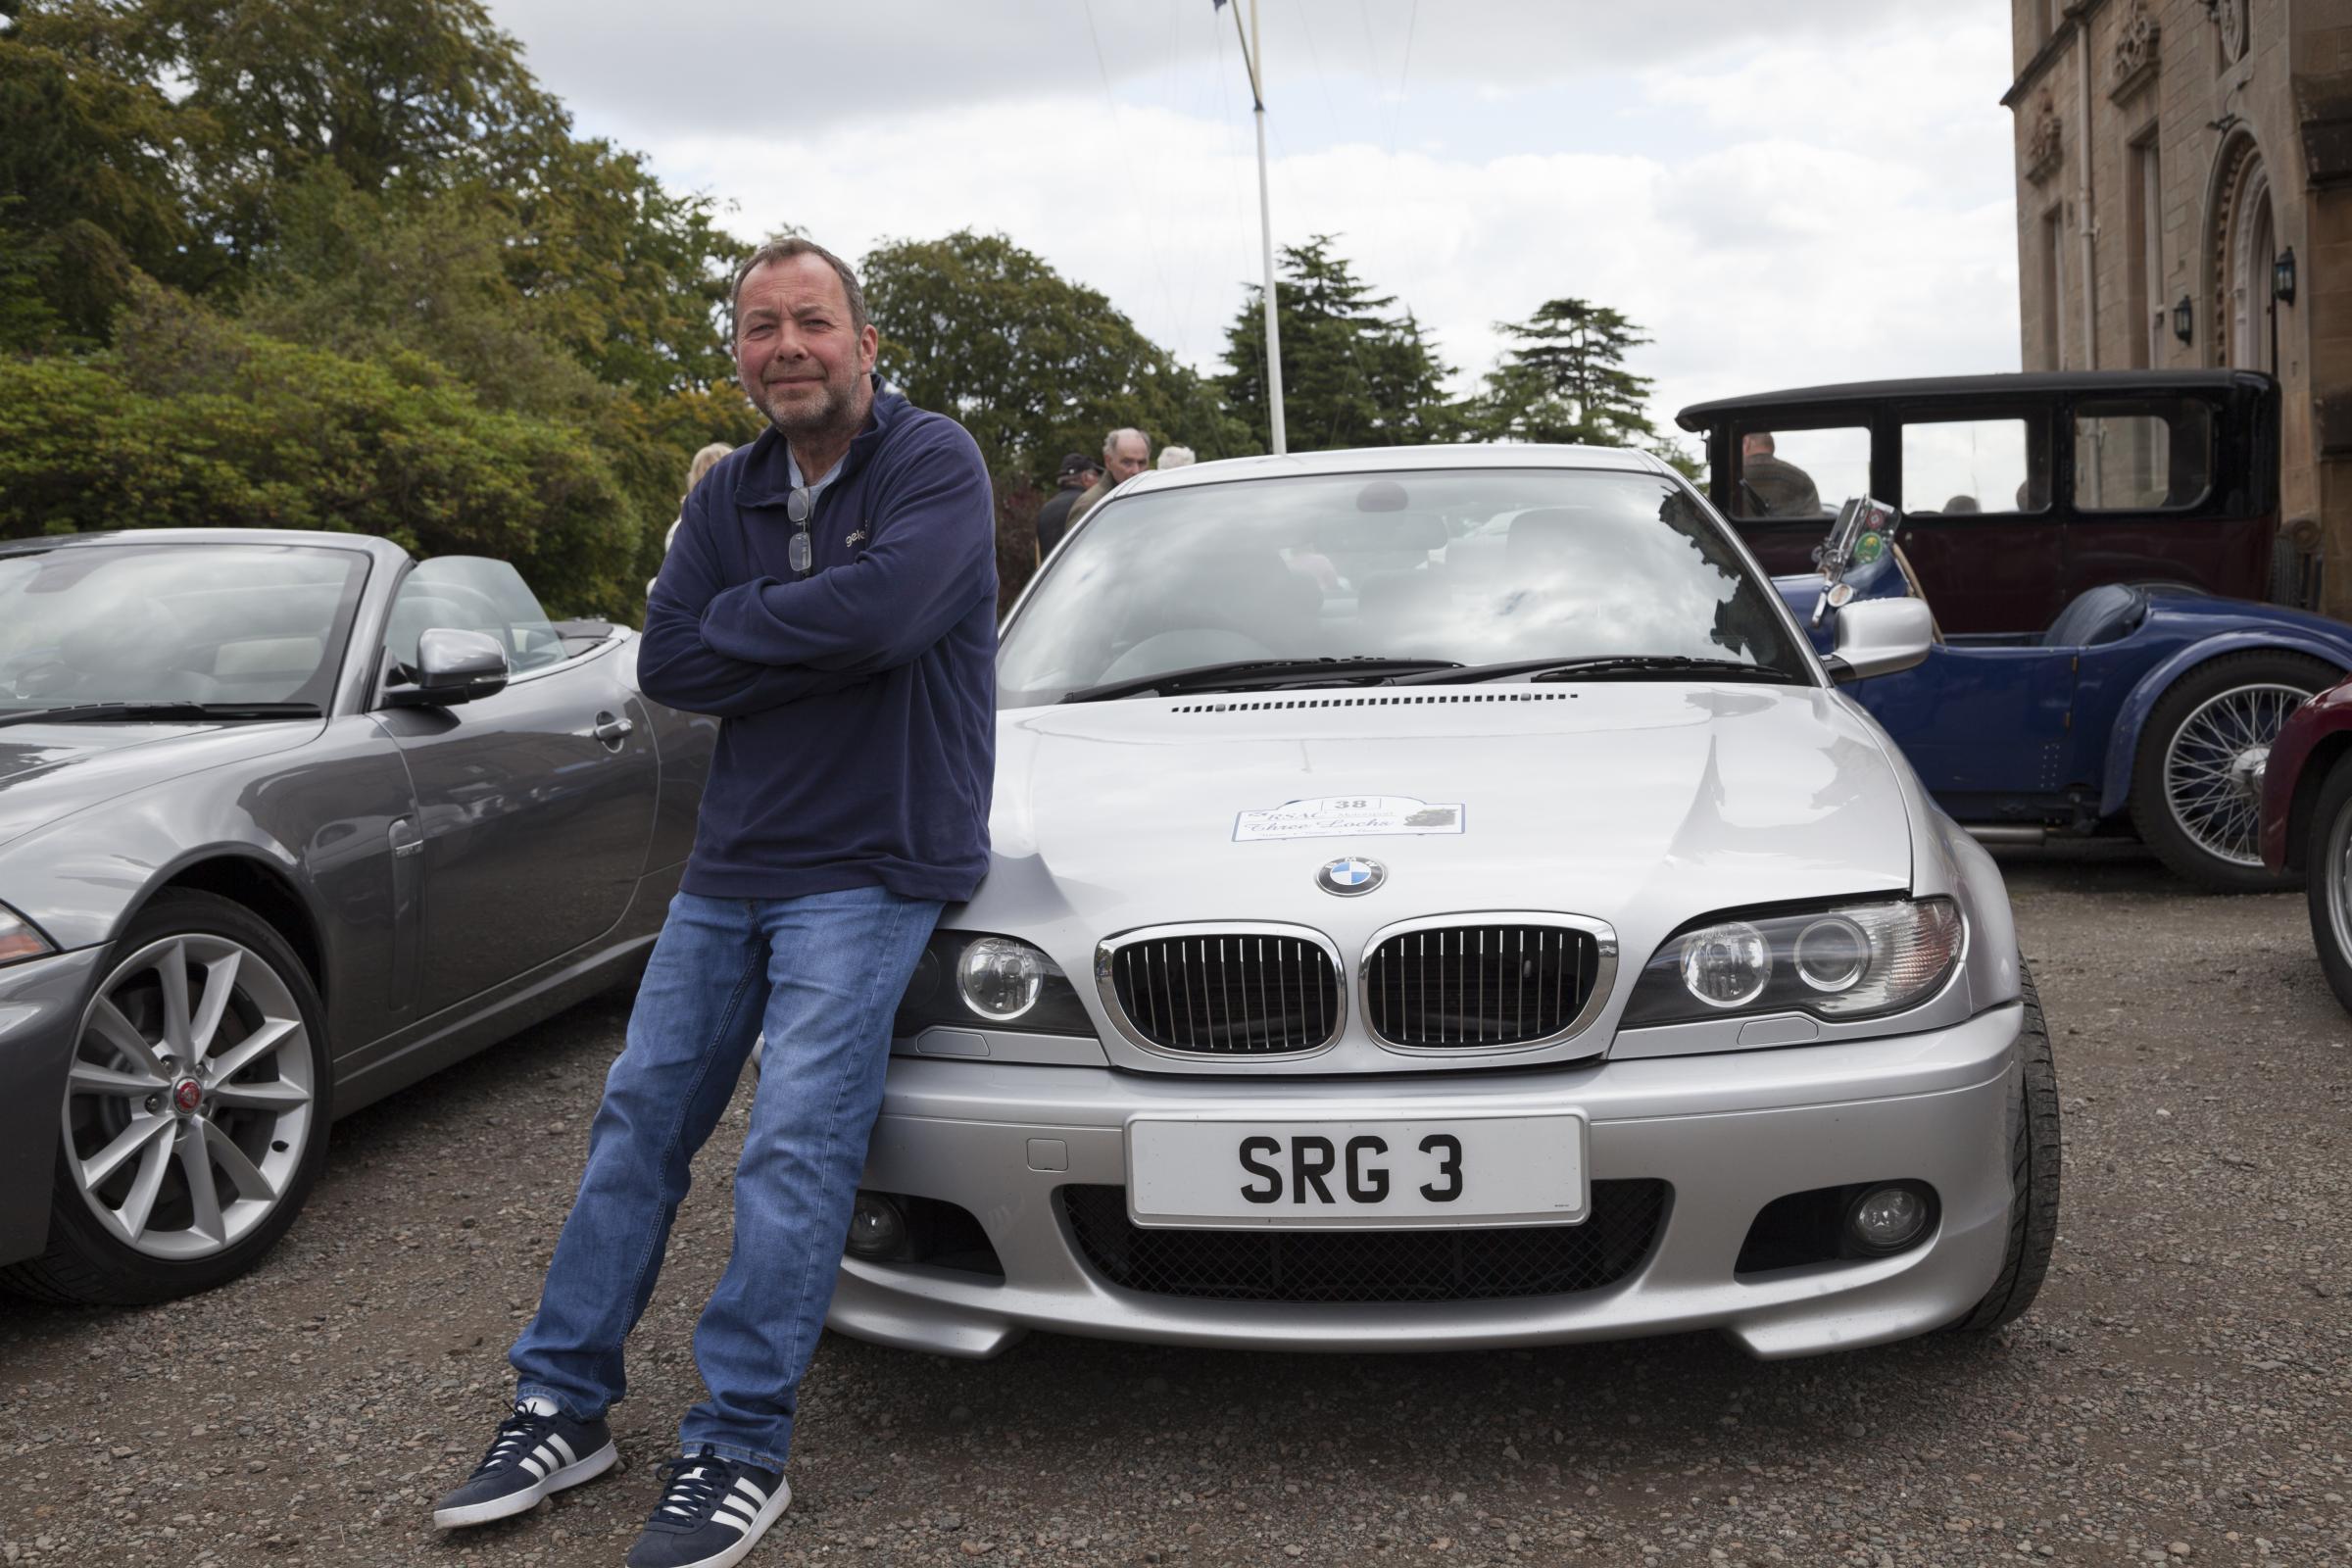 Ruari Gillespie’s 2006 BMW 330CI was one of the last cars of its kind to be built